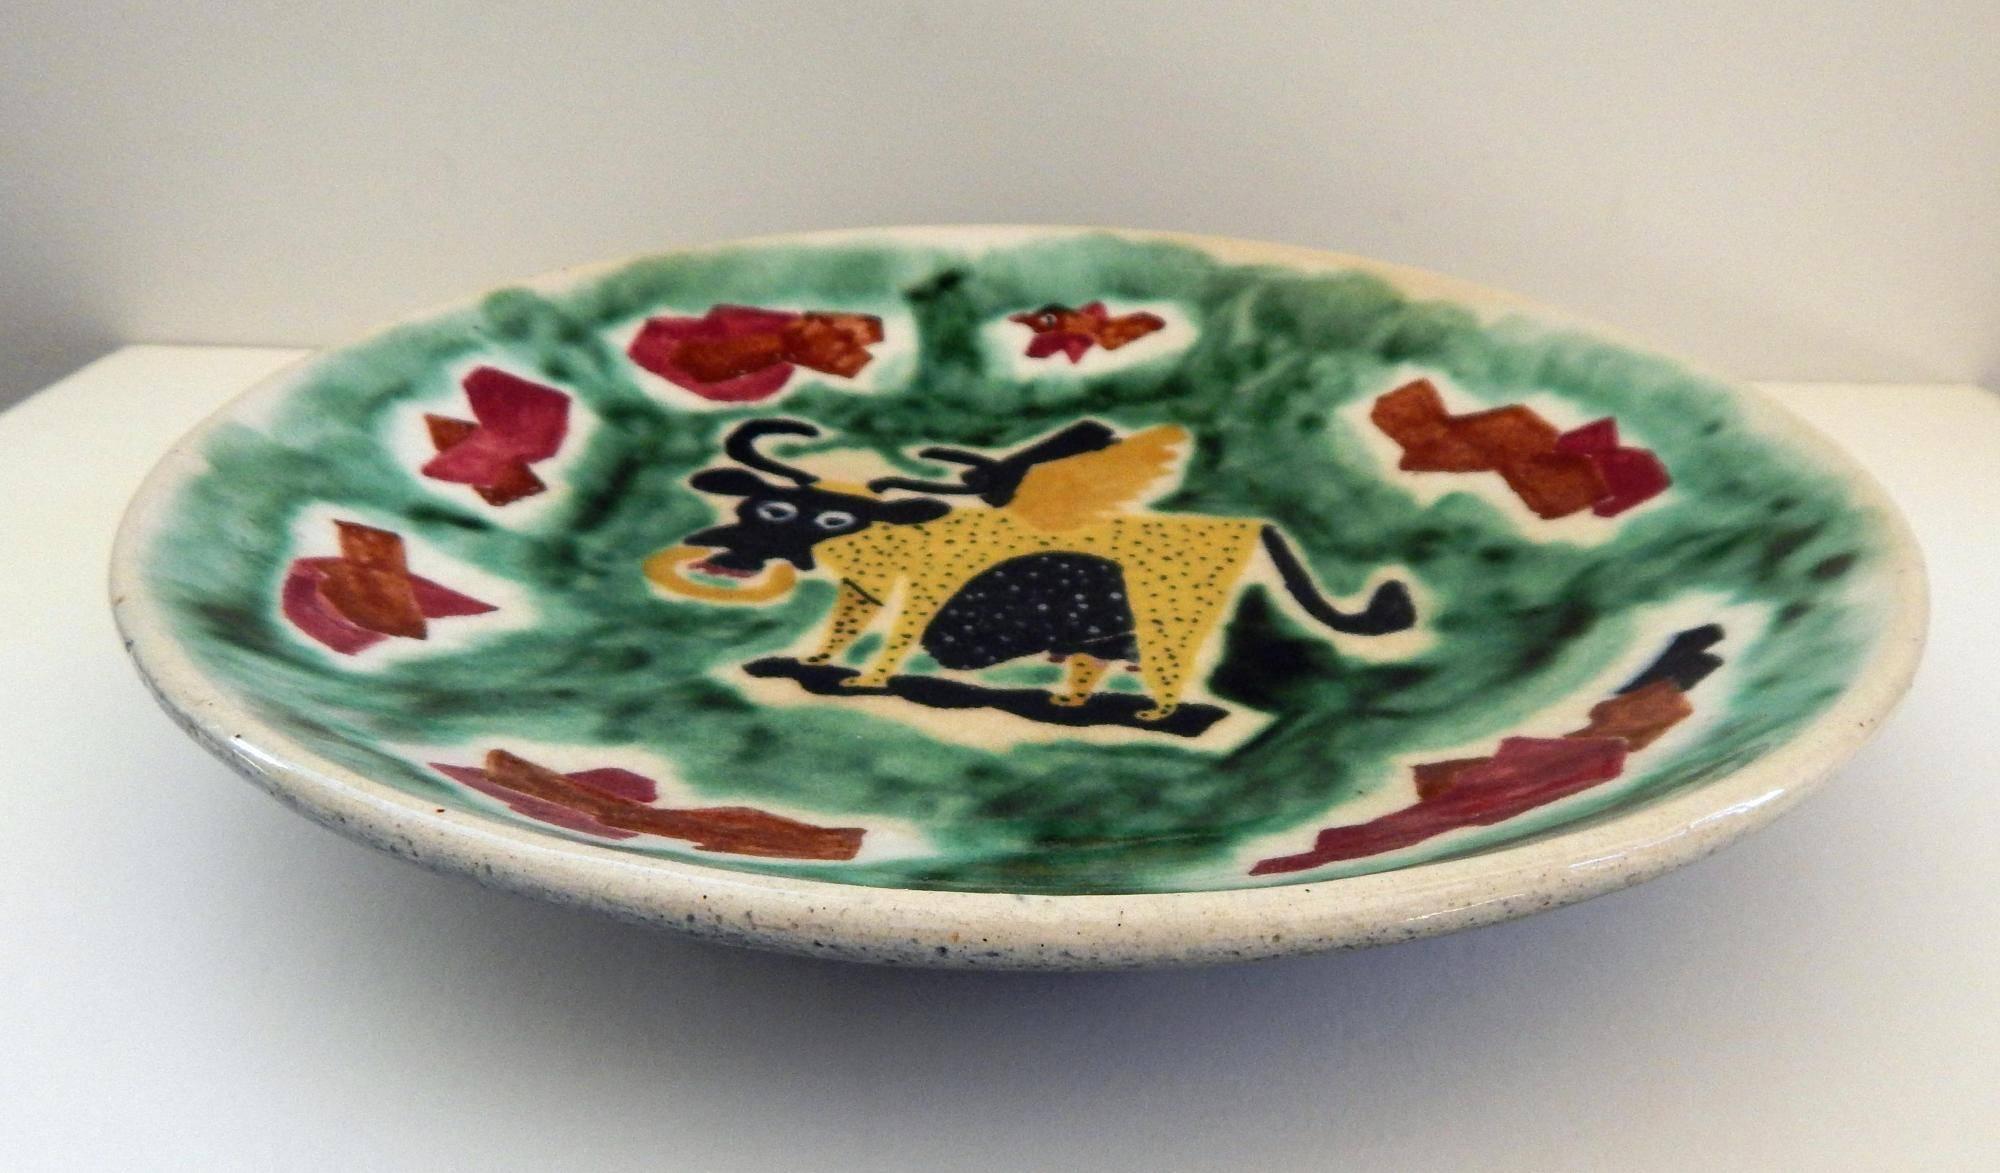 This whimsical hand decorated platter depicting a winged cow is in excellent condition.
Signed Nura on the front, AAA and SS on back
No chips, cracks or repairs. Measures: 1 7/8 H x 10 3/4 in D.

Nura Woodson Ulreich (1899-1950) was active or